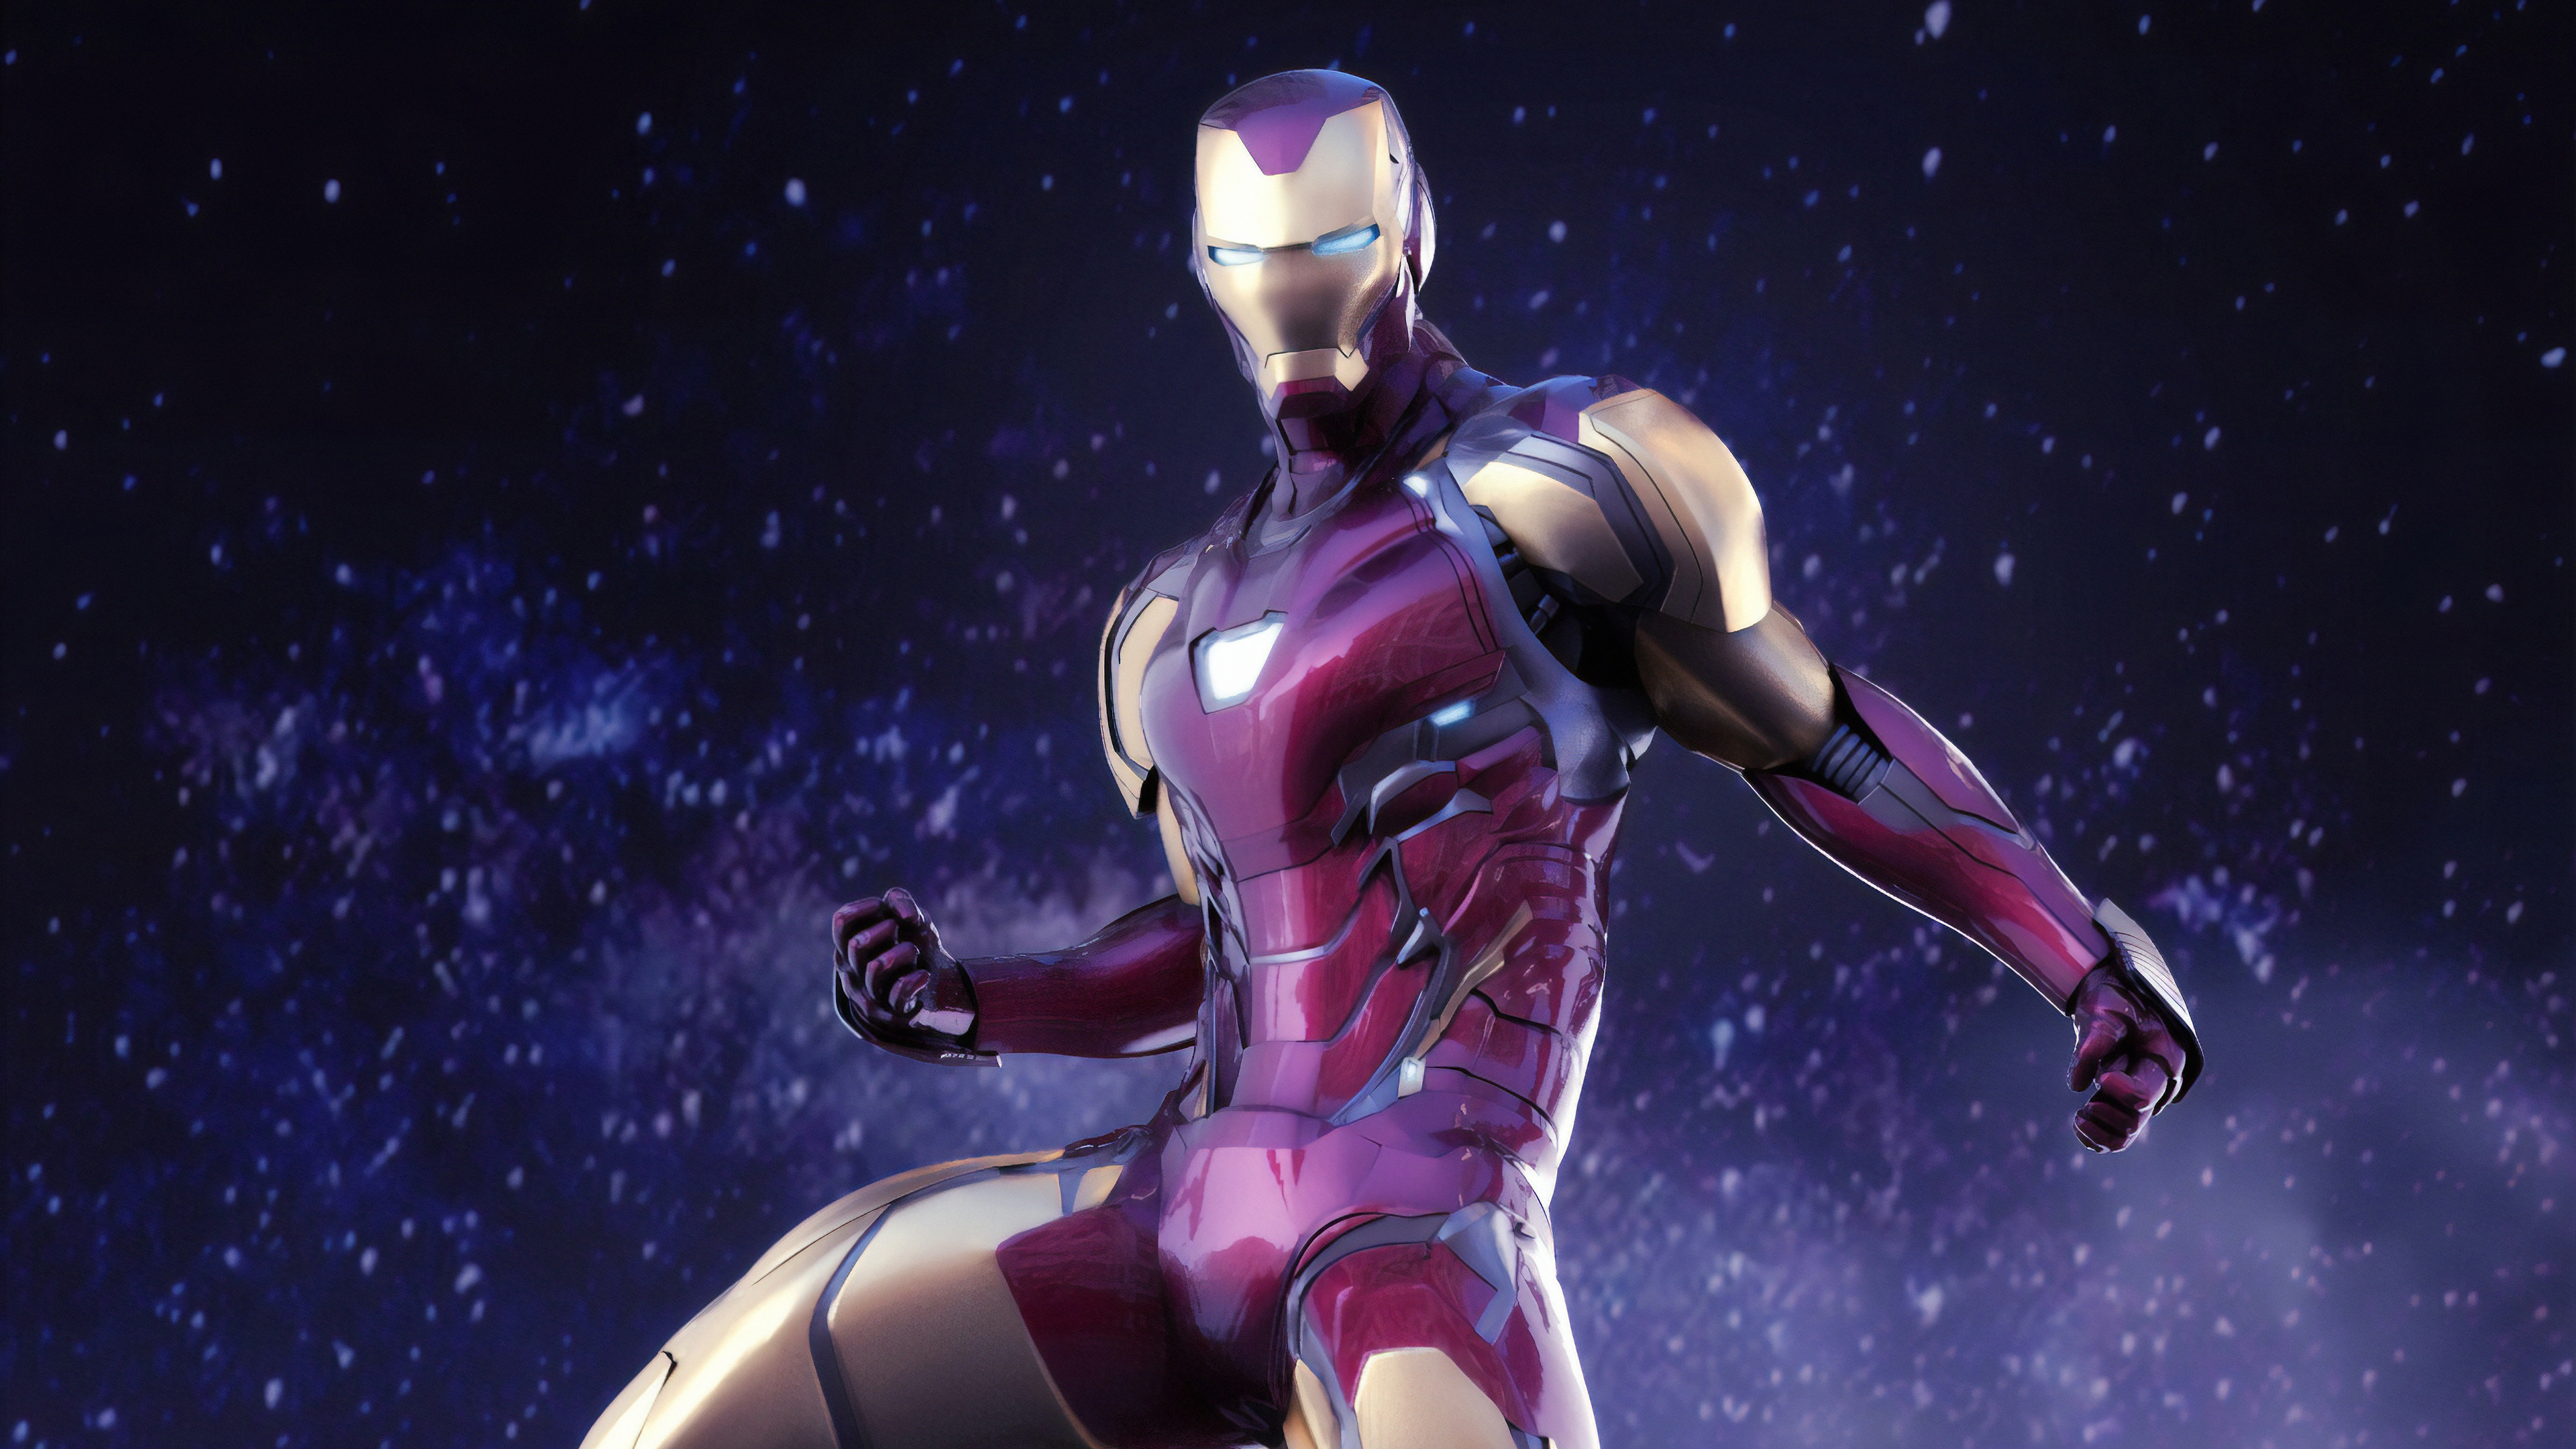 What was the last suit of armor that Tony Stark built before the events of  Avengers: Endgame? What were its feats/abilities? - Quora